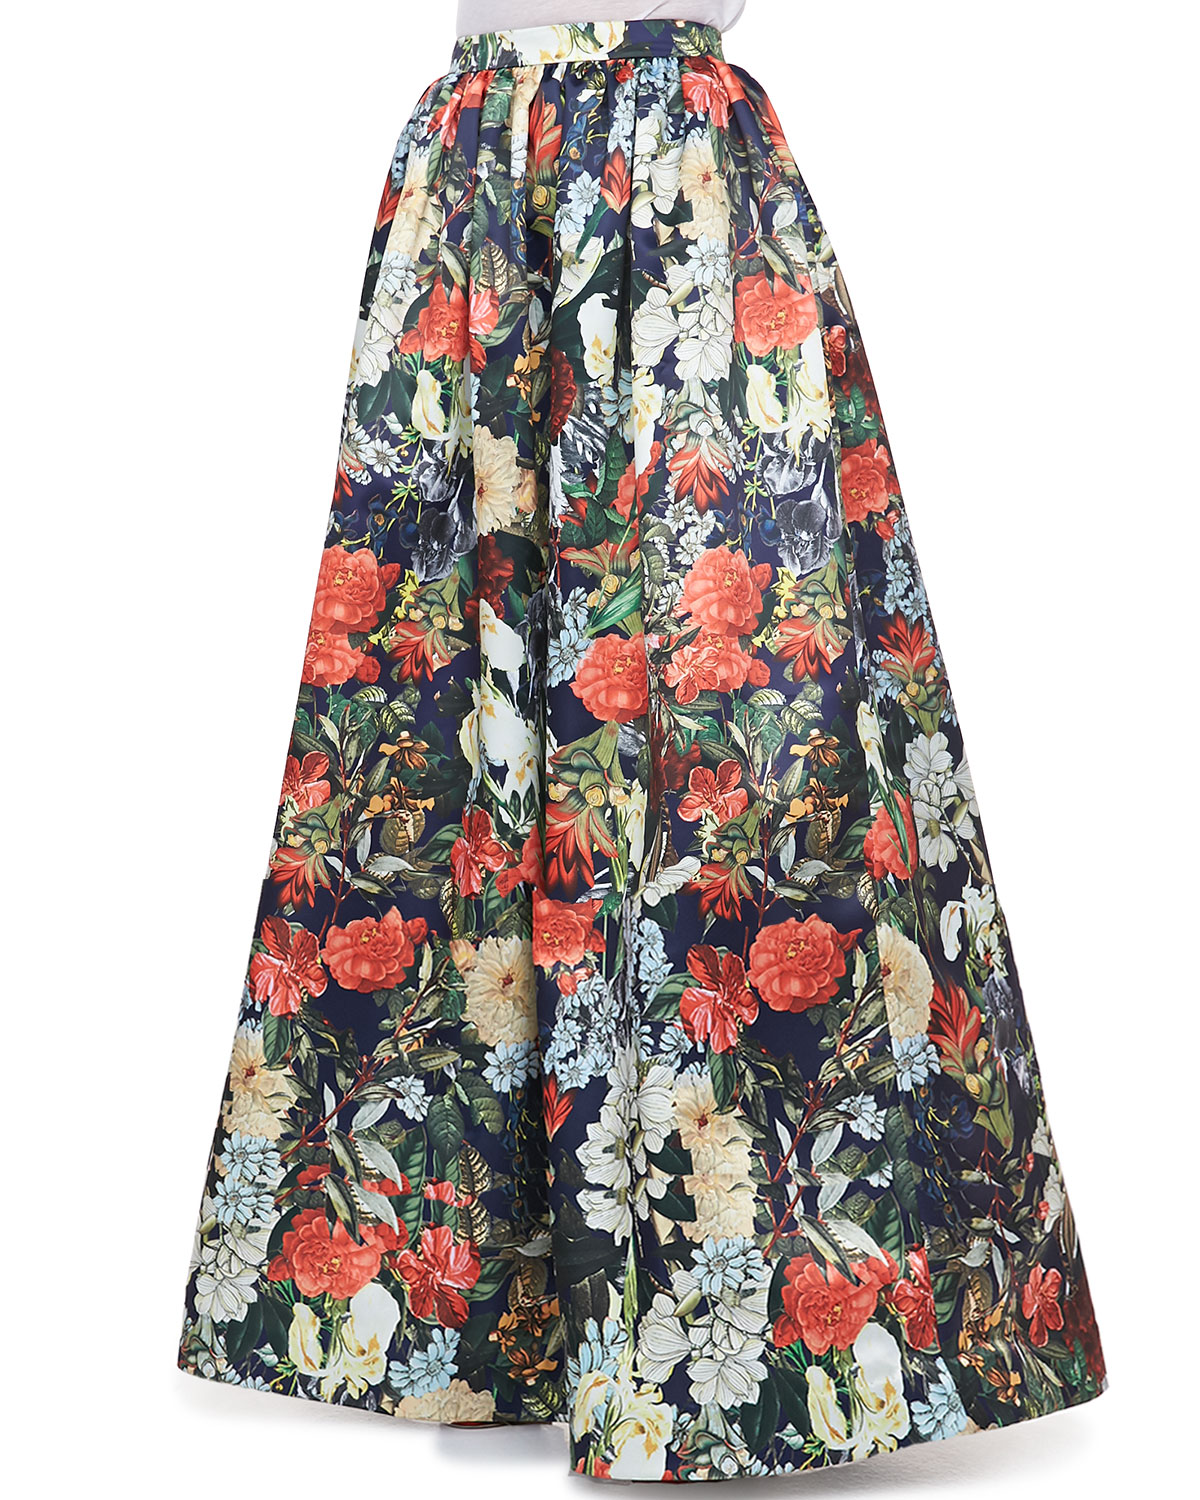 Lyst - Alice + Olivia Tina Floral Ball Gown Skirt Alice Olivia